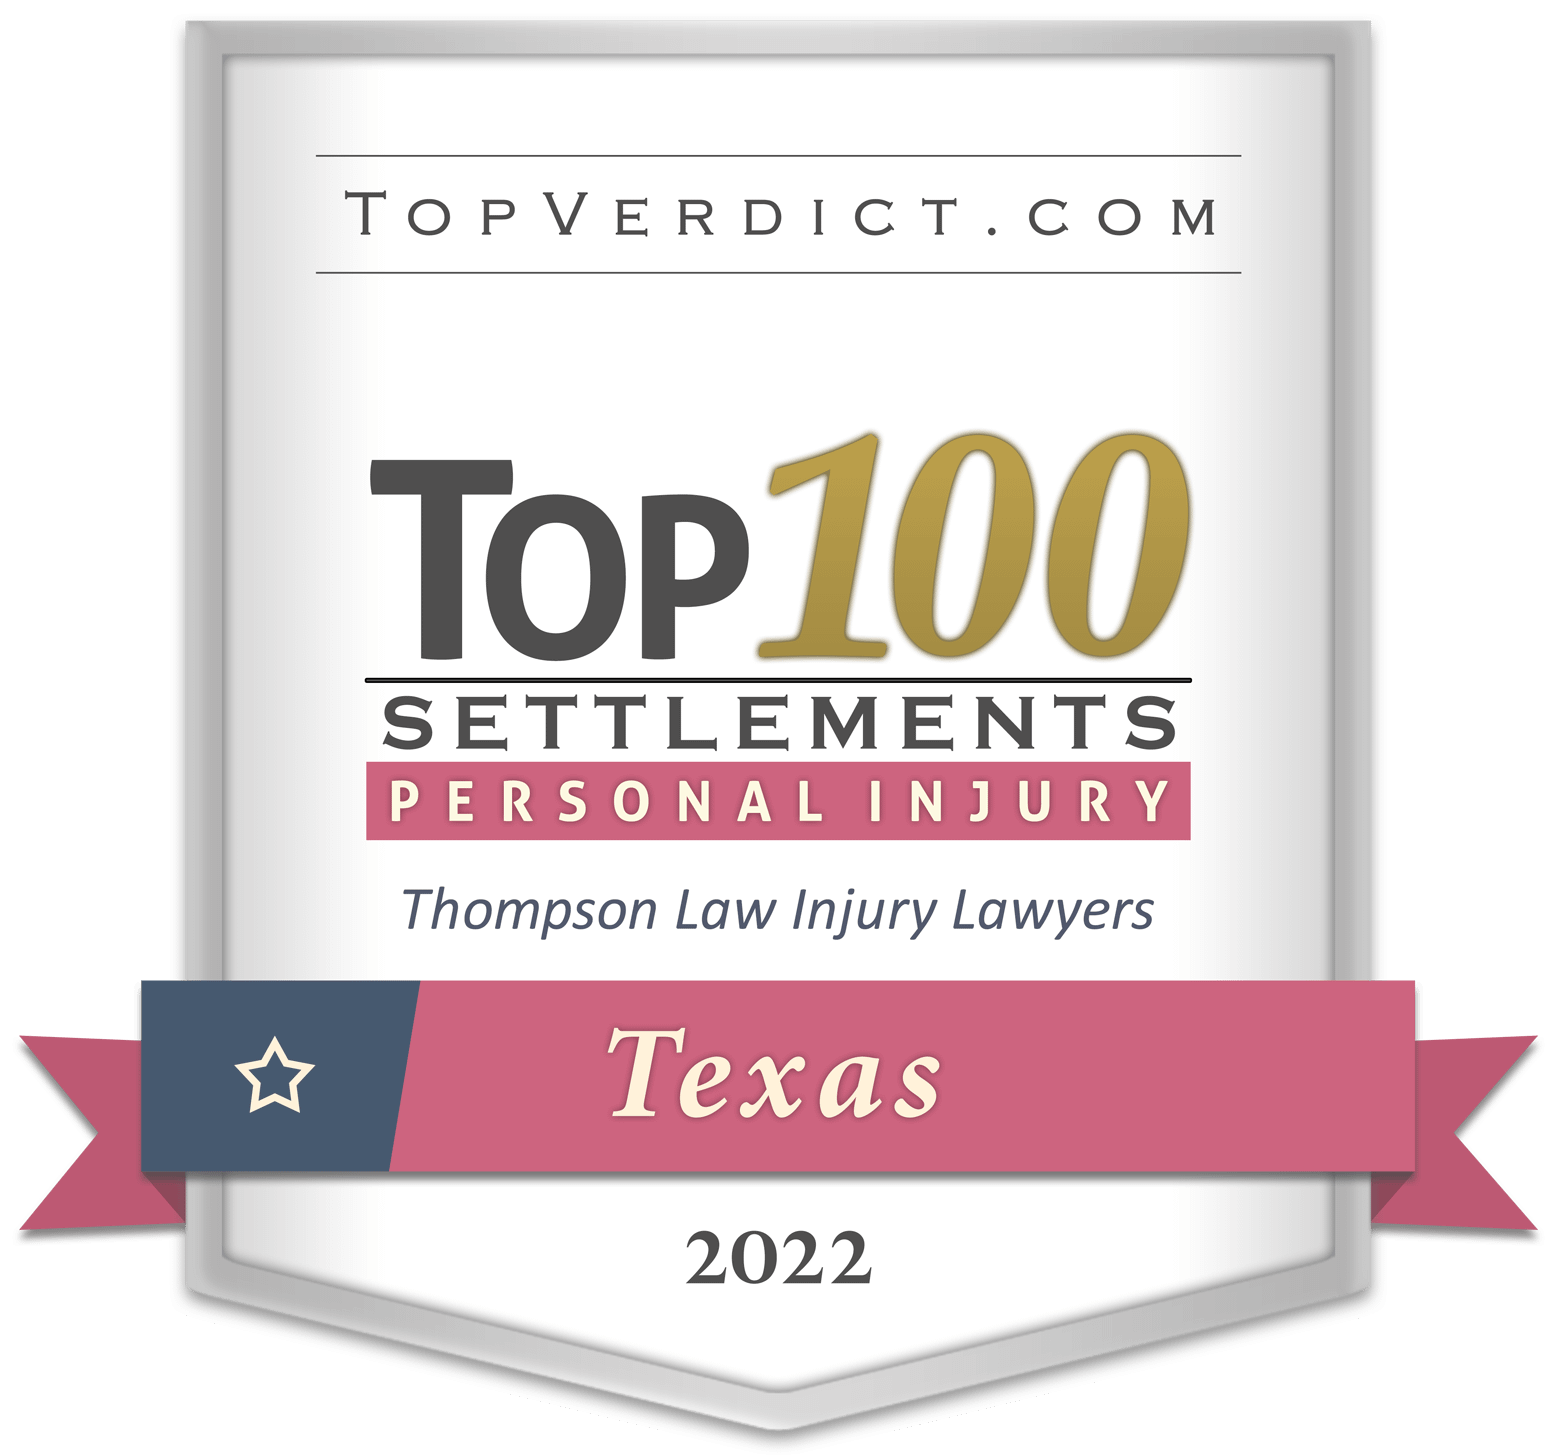 Top 100 Personal Injury Settlements in Texas 2022 - Round Rock Truck Accident Lawyers